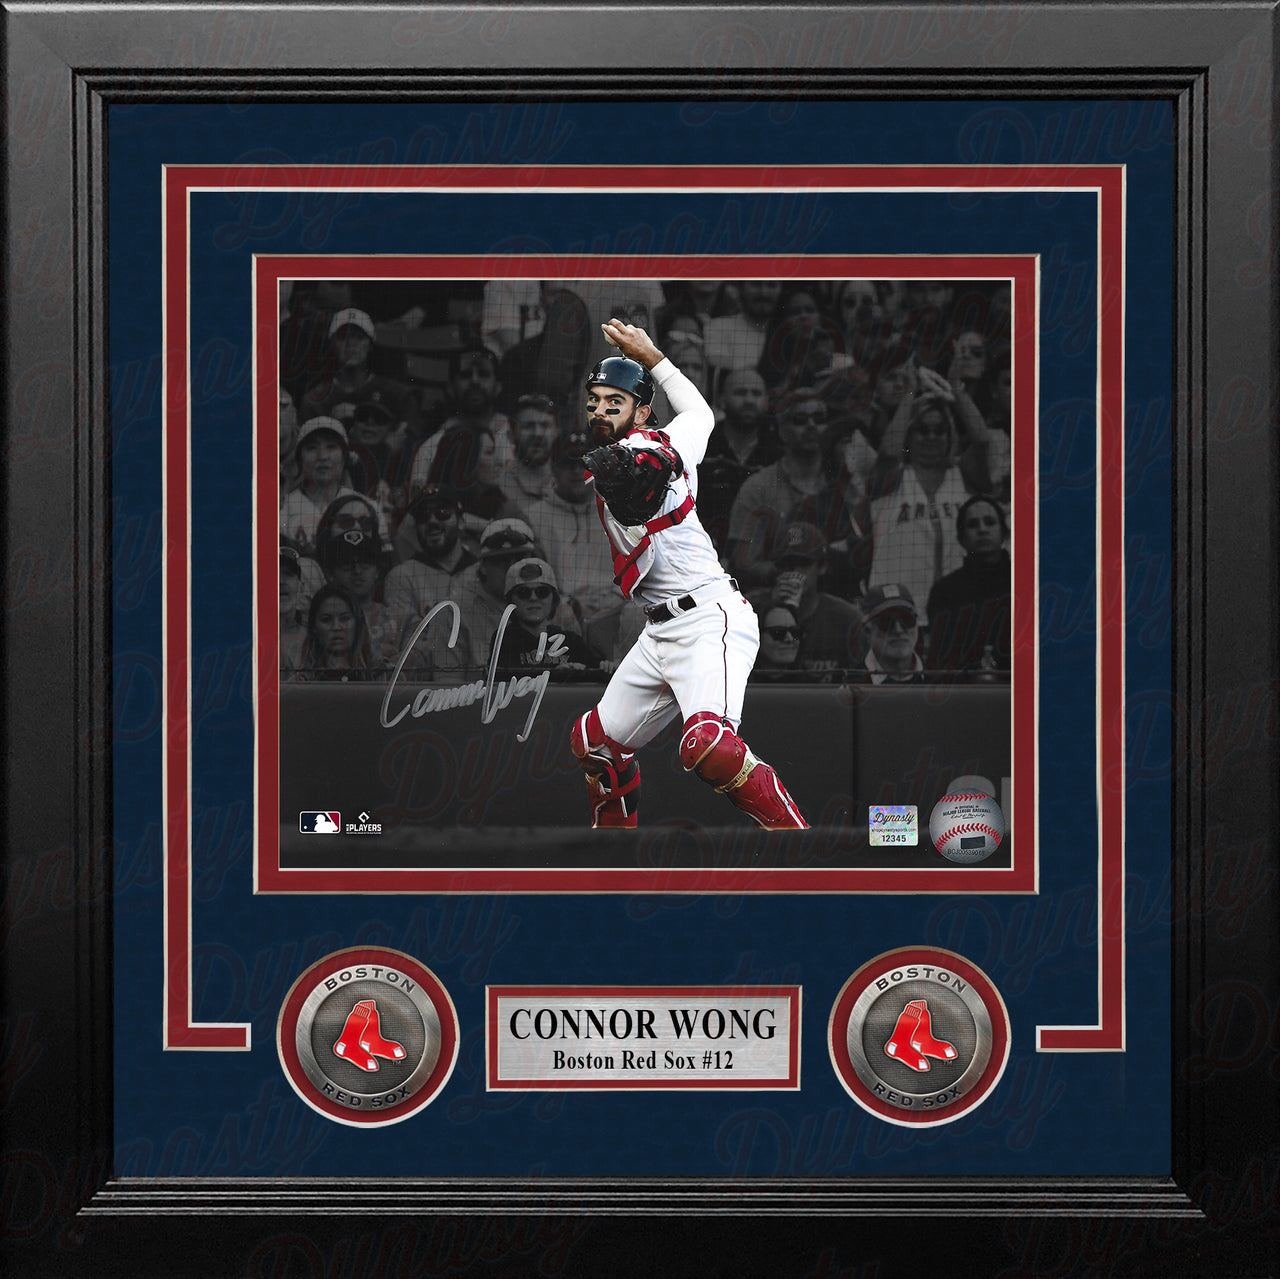 Connor Wong Throwing Action Boston Red Sox Autographed 8" x 10" Framed Spotlight Baseball Photo